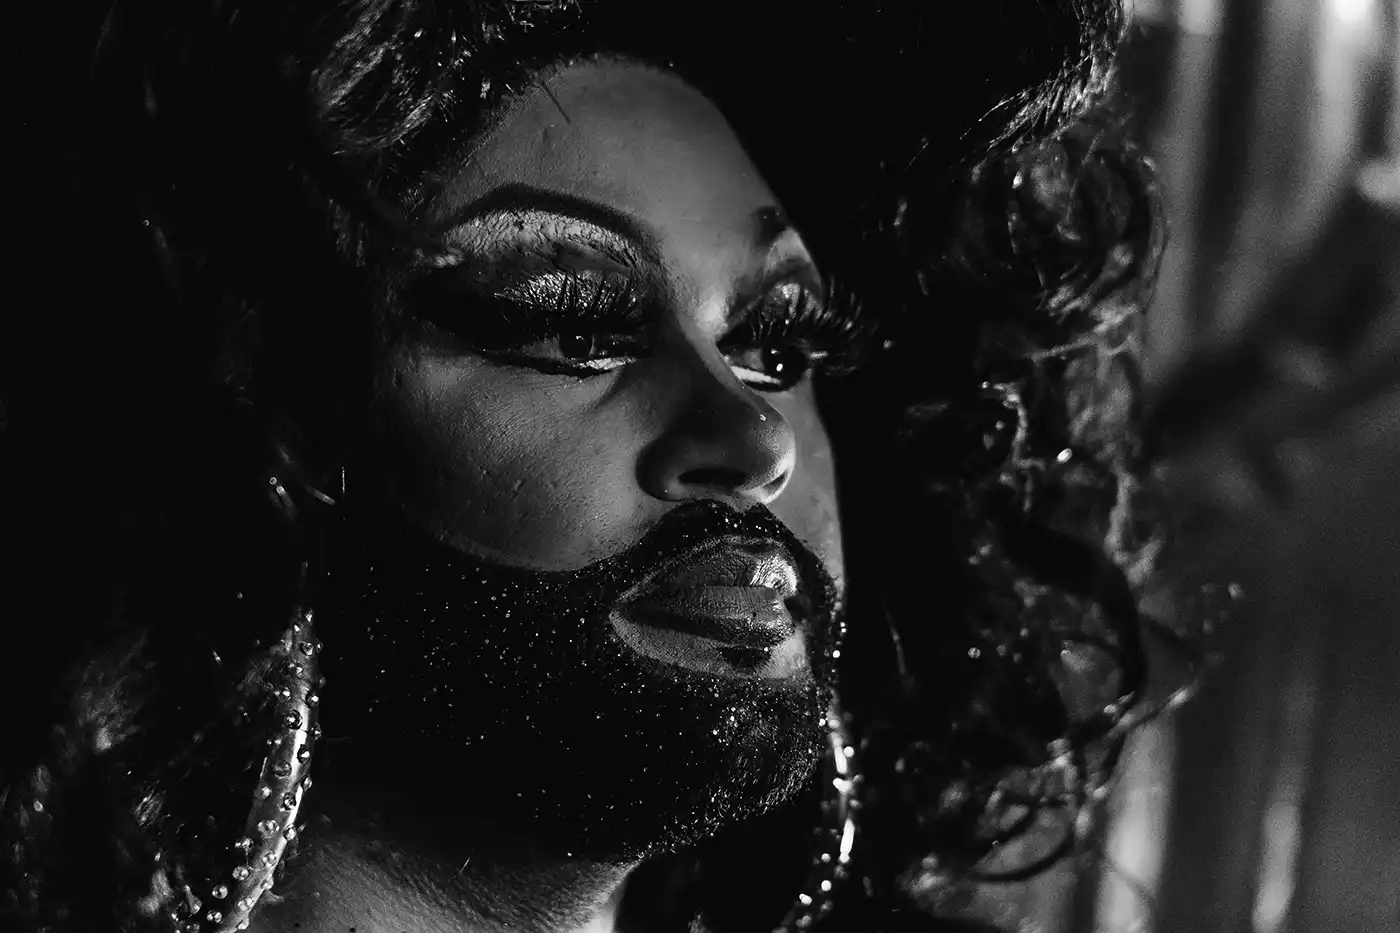 Moving toward the goal of becoming a full-time drag queen, Jaliah is excited to see where this journey takes her.